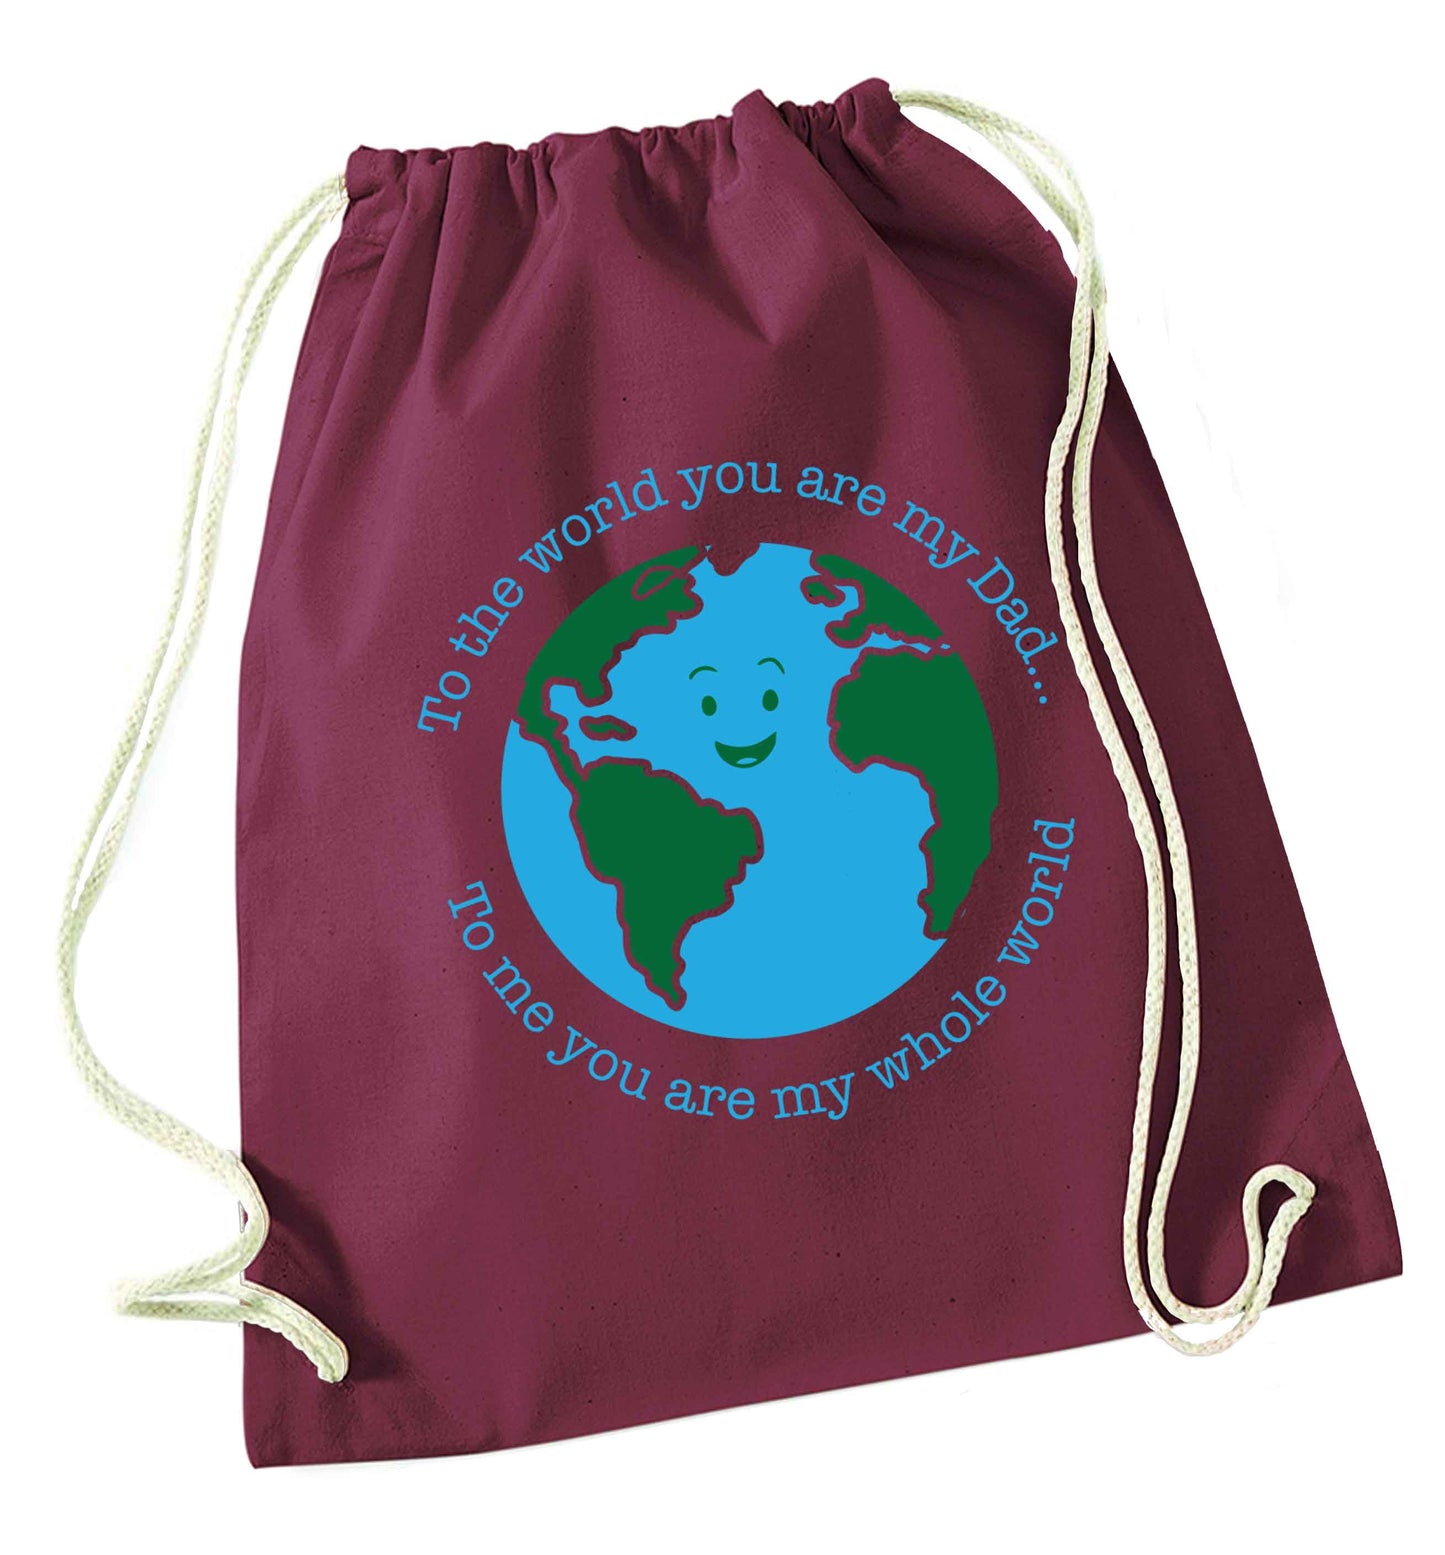 To the world you are my dad, to me you are my whole world maroon drawstring bag